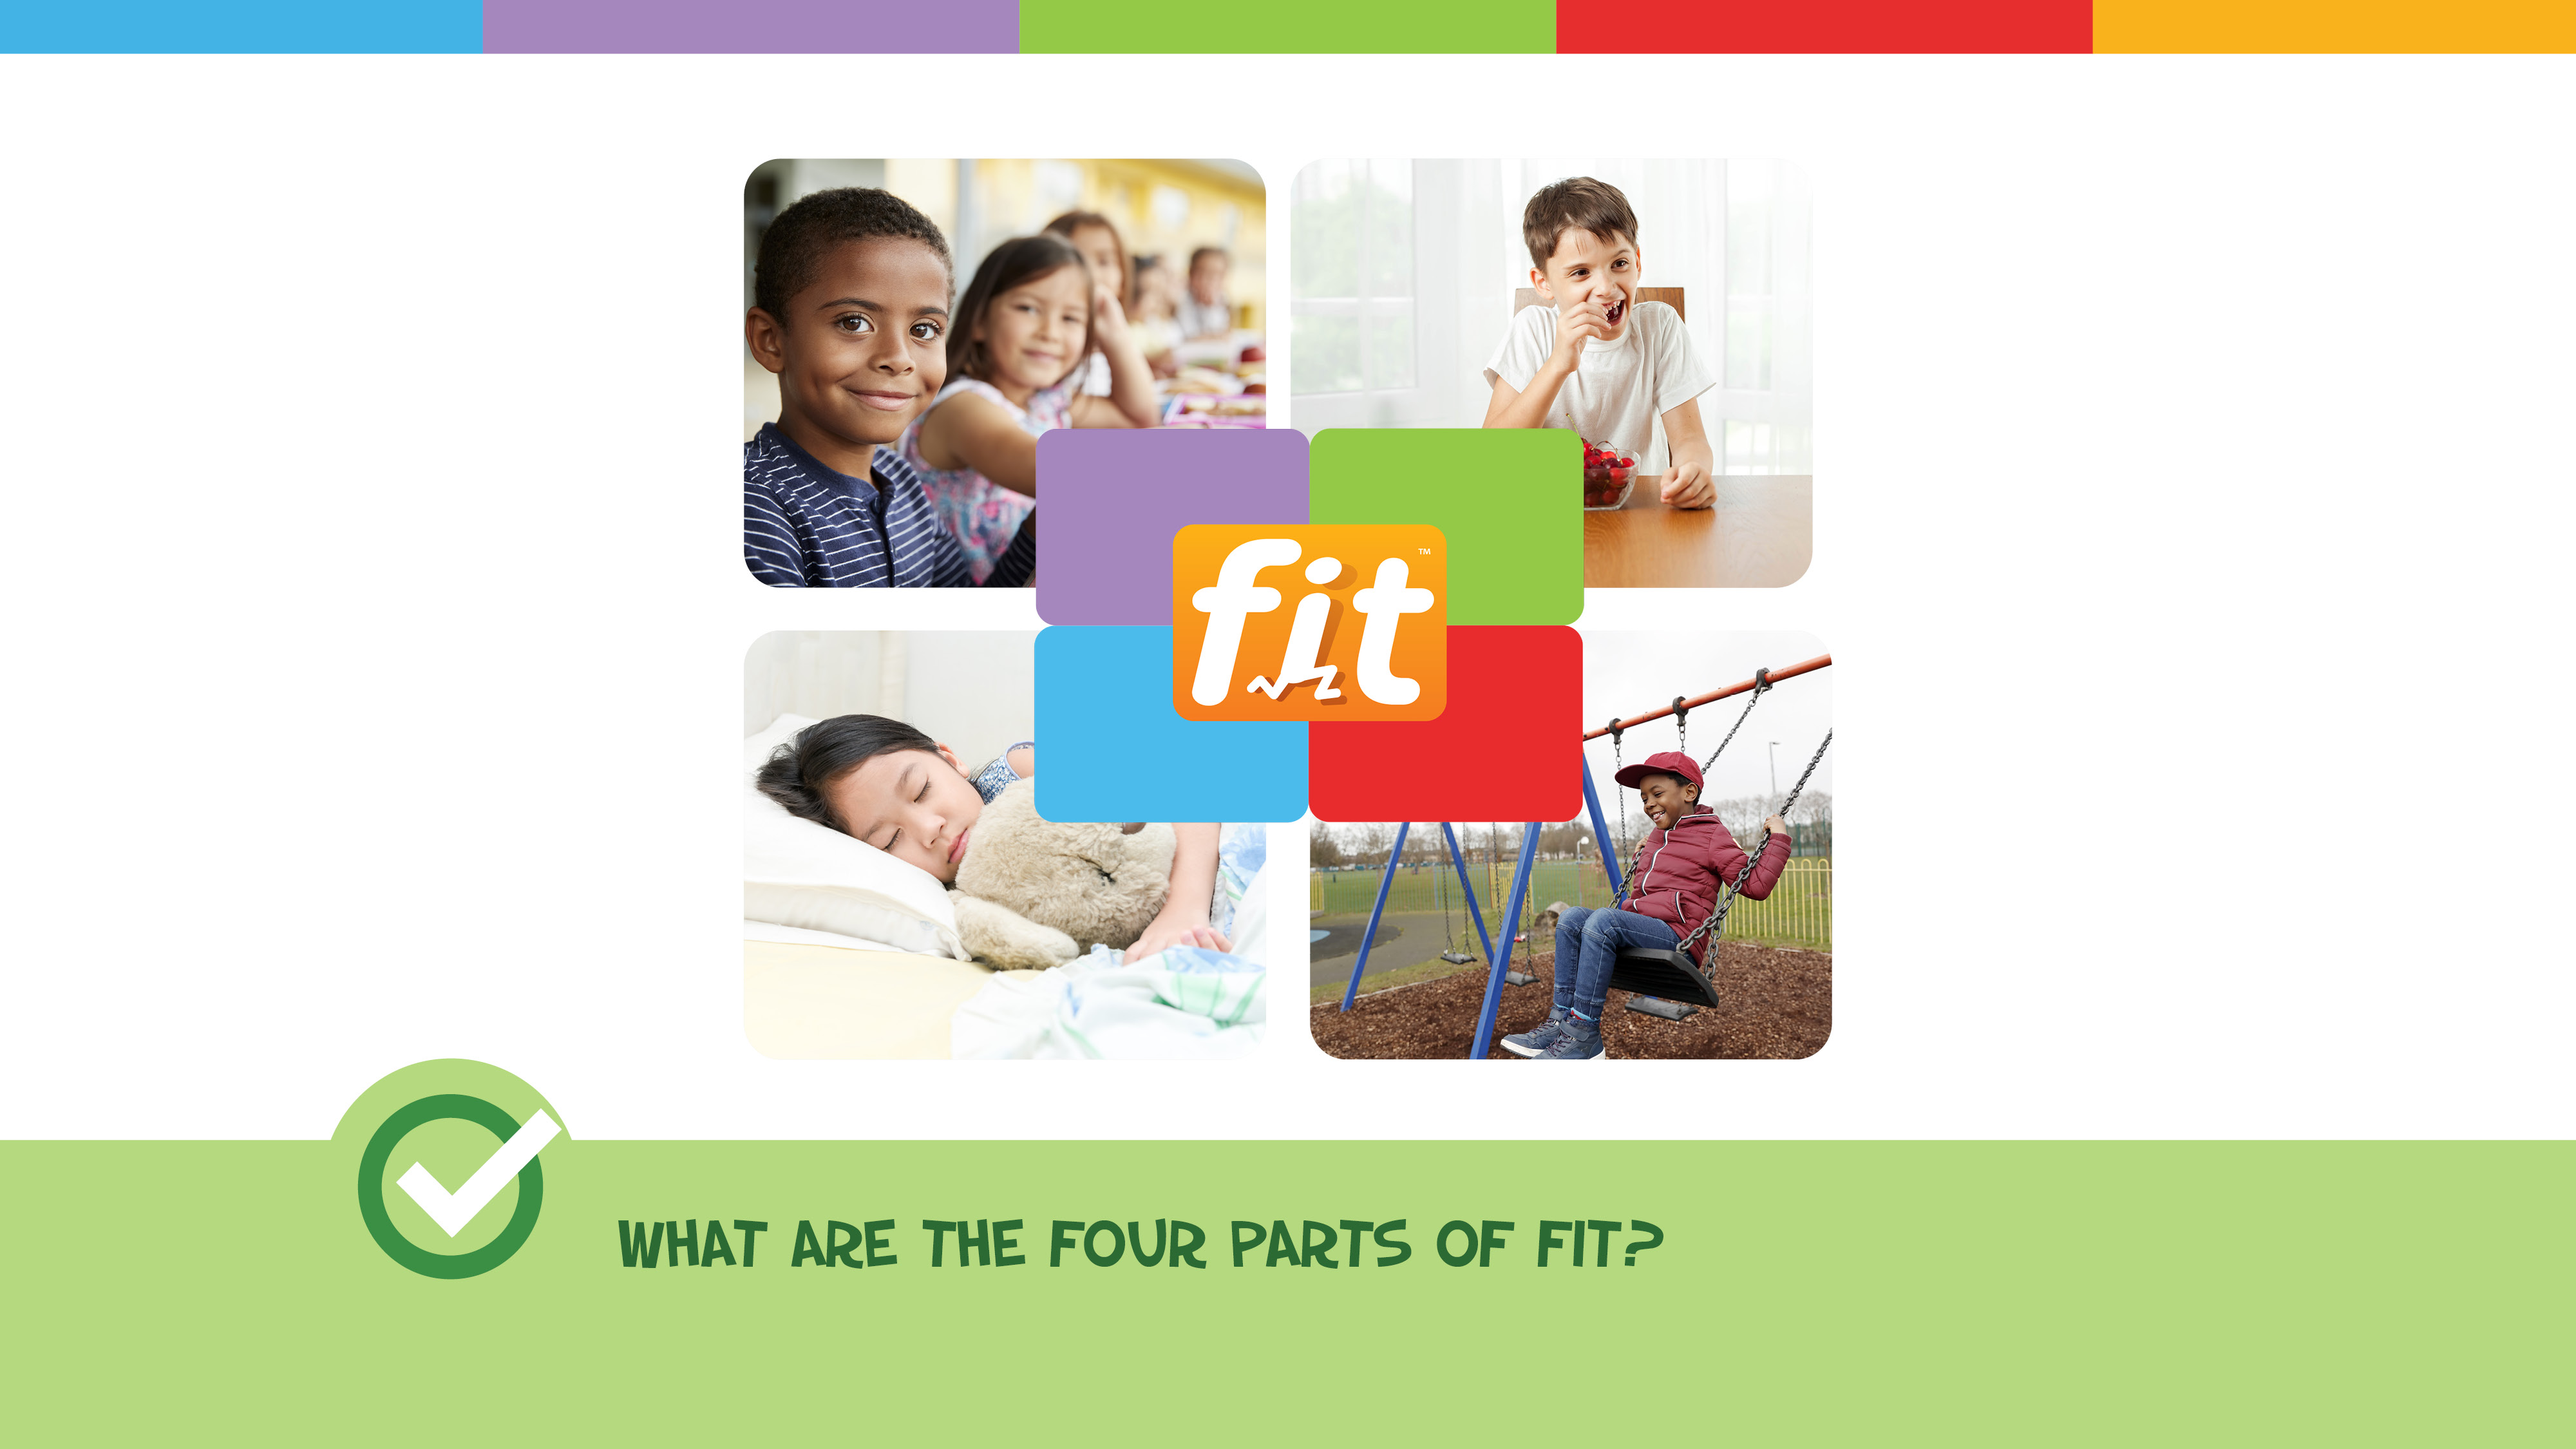 It's All Connected slideshow Grades K-2 - Students in backpacks - Sanford fit